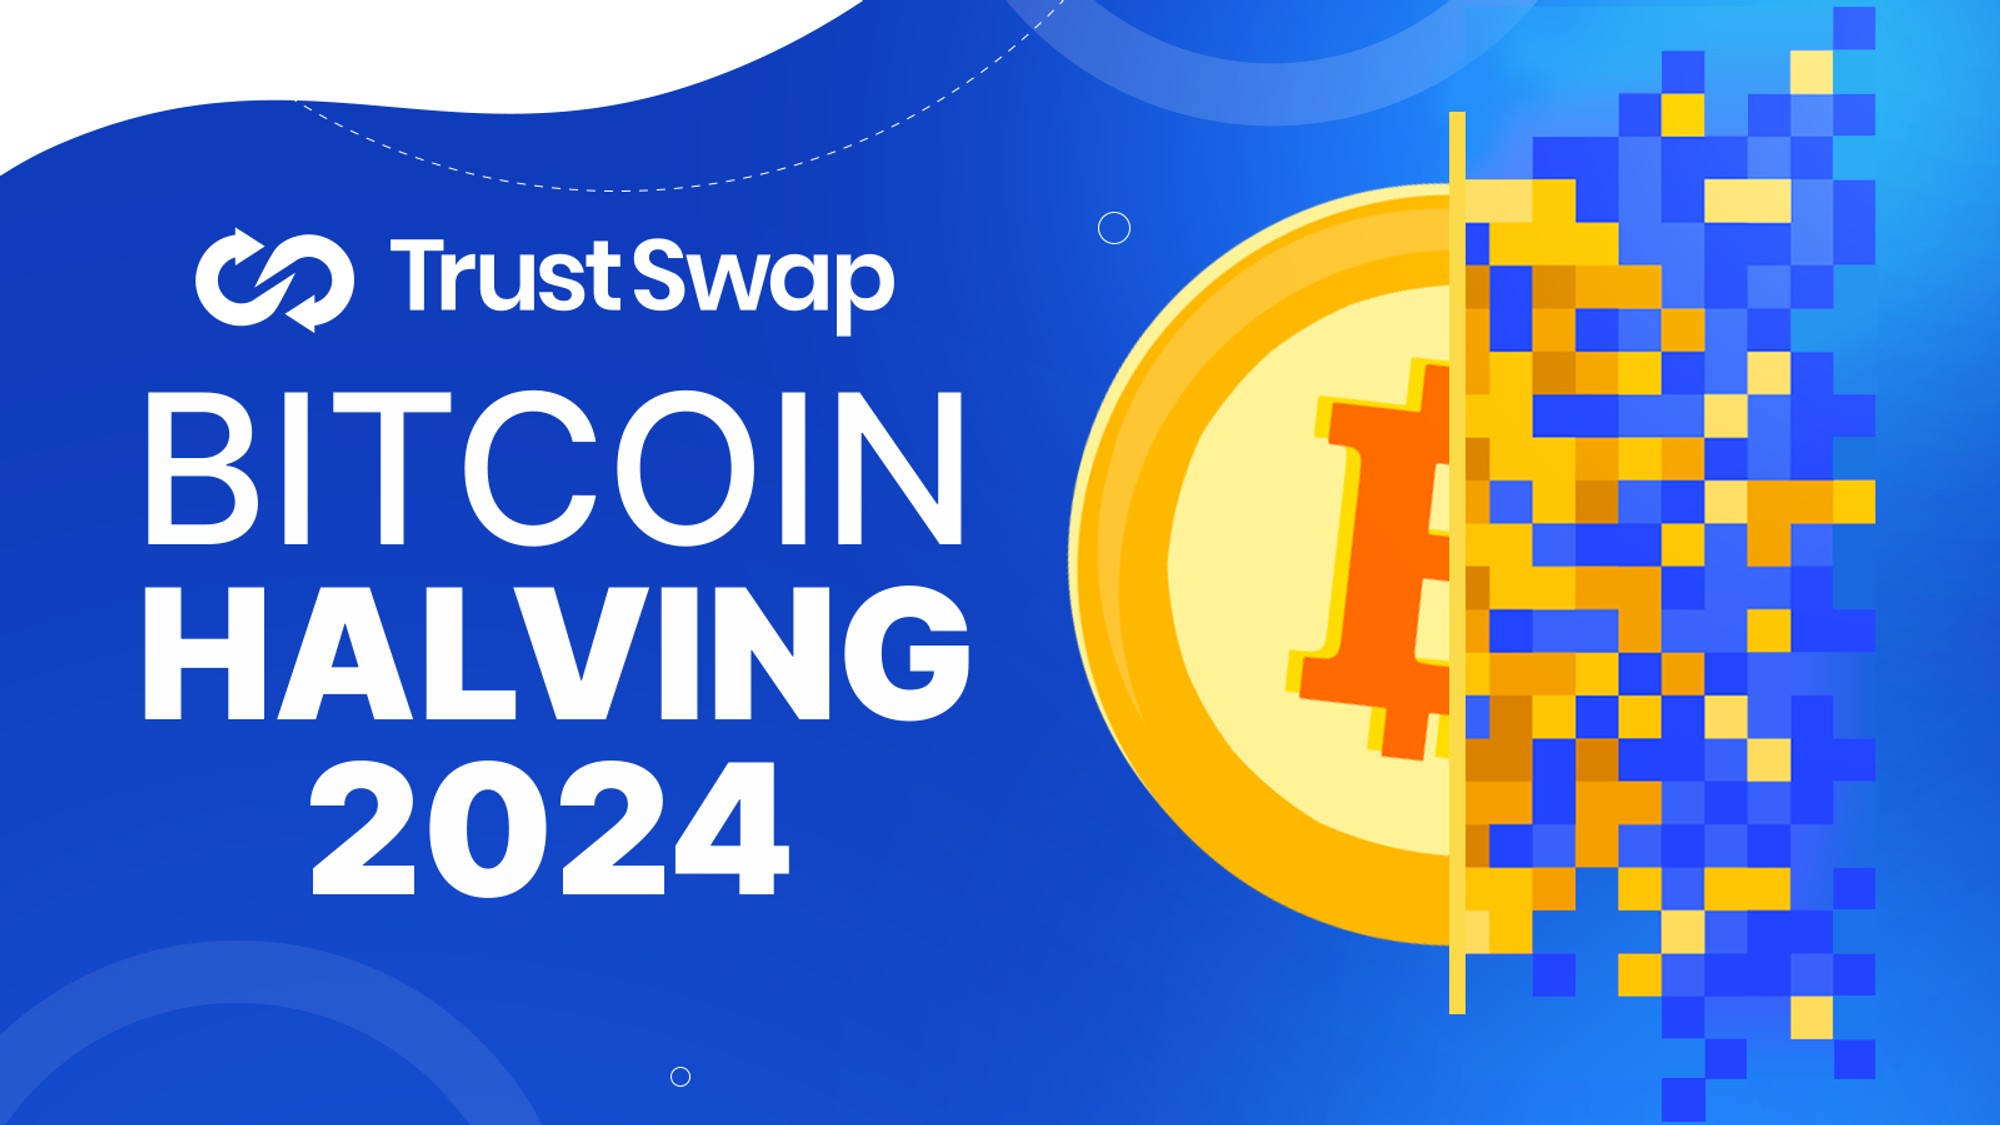 Beyond the Hype: Understanding The 2024 Bitcoin Halving and Its Market Effects